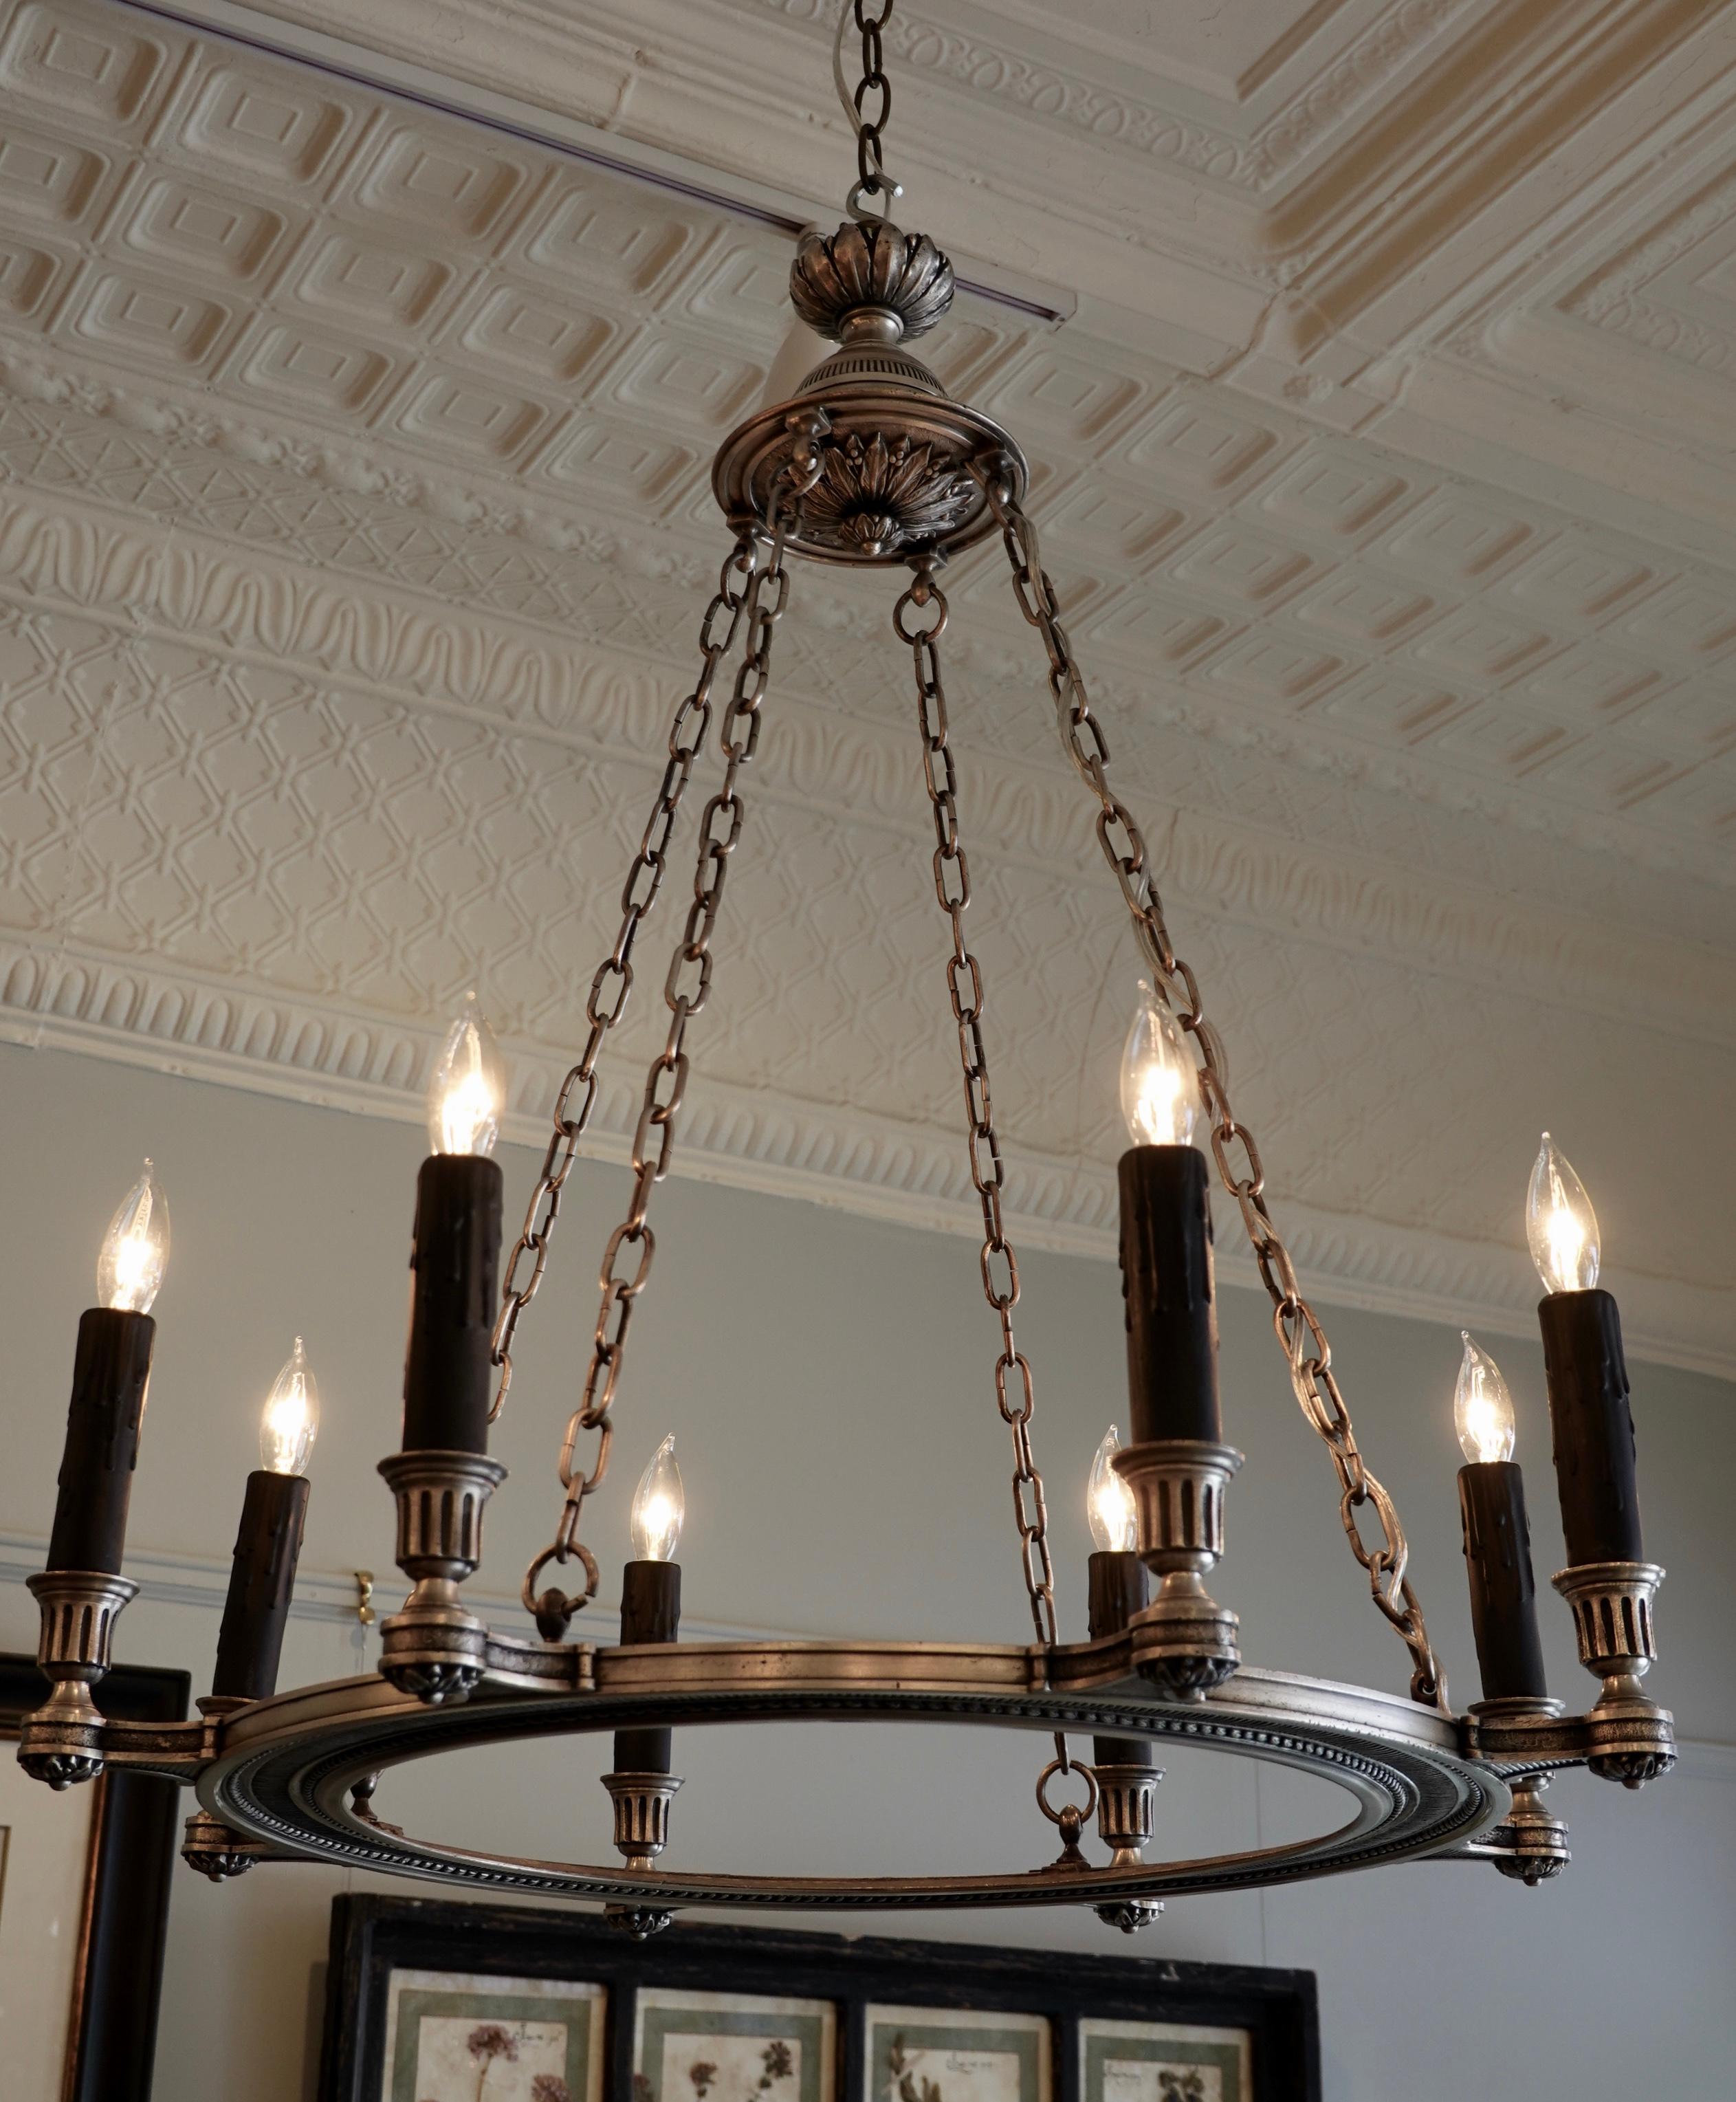 An elegant French silvered-bronze chandelier in the neoclassical style, suspended by four chains. The chandelier has be rewired with eight lights for the US. The frame features nicely chiseled details including rosettes, pearl beading and